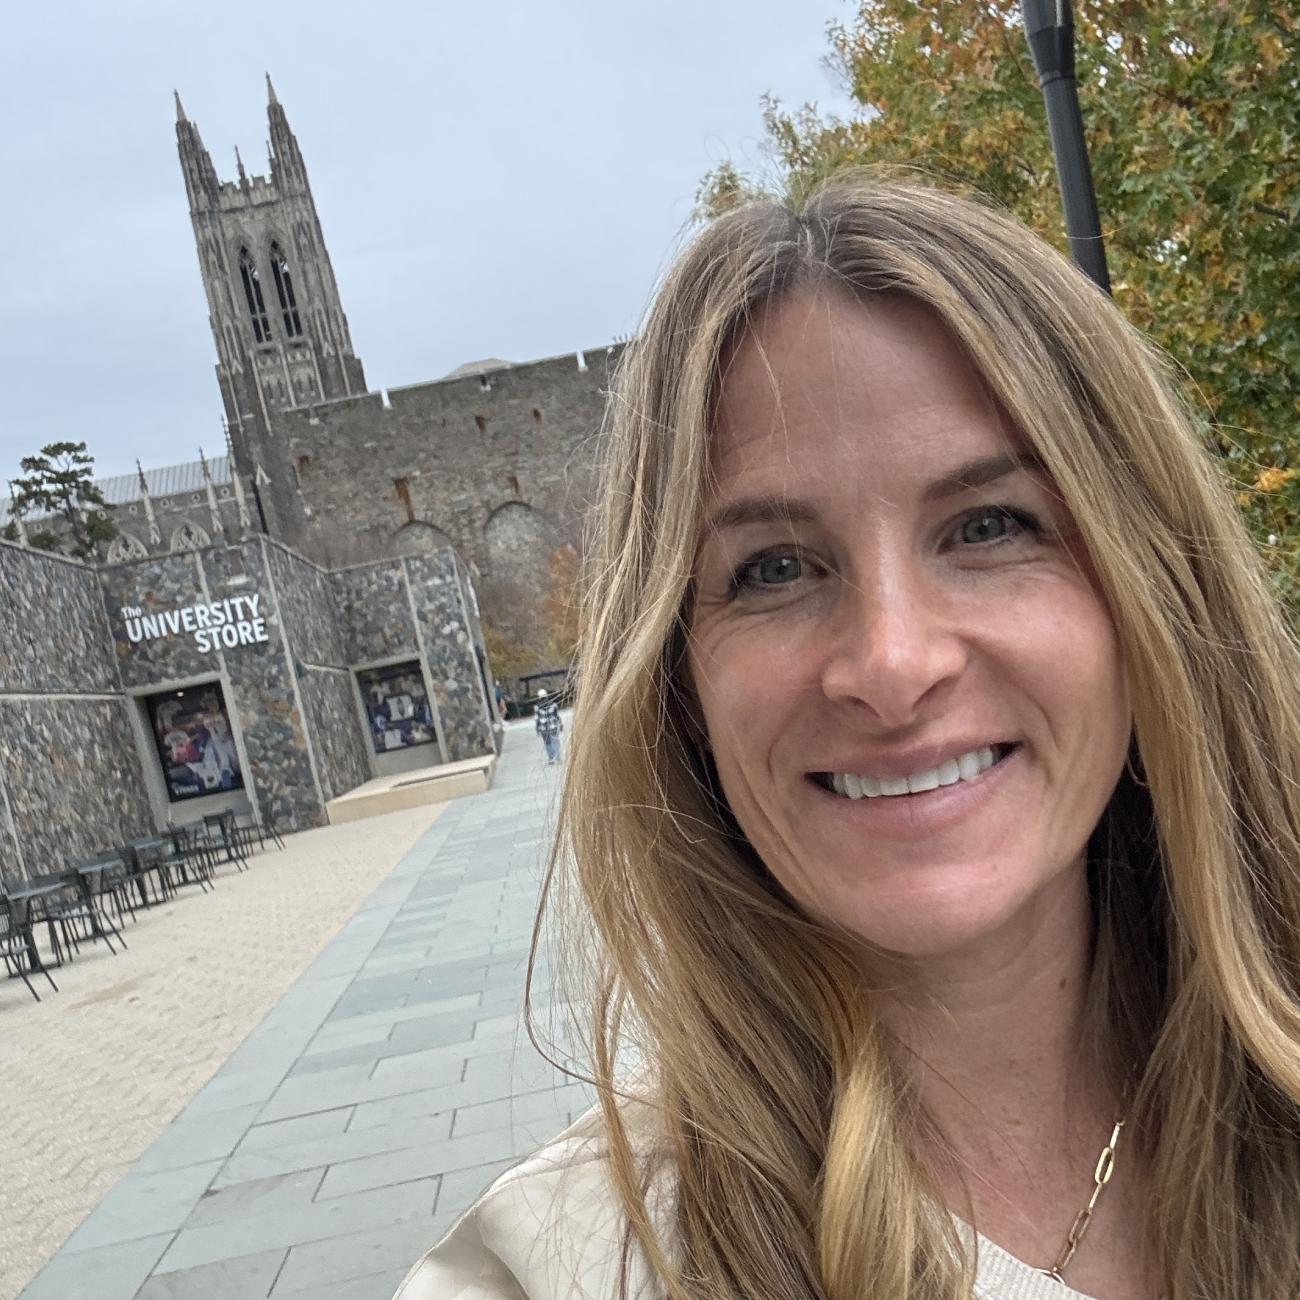 Lyndsay Lyle on campus in a selfie with Duke Chapel in the background.